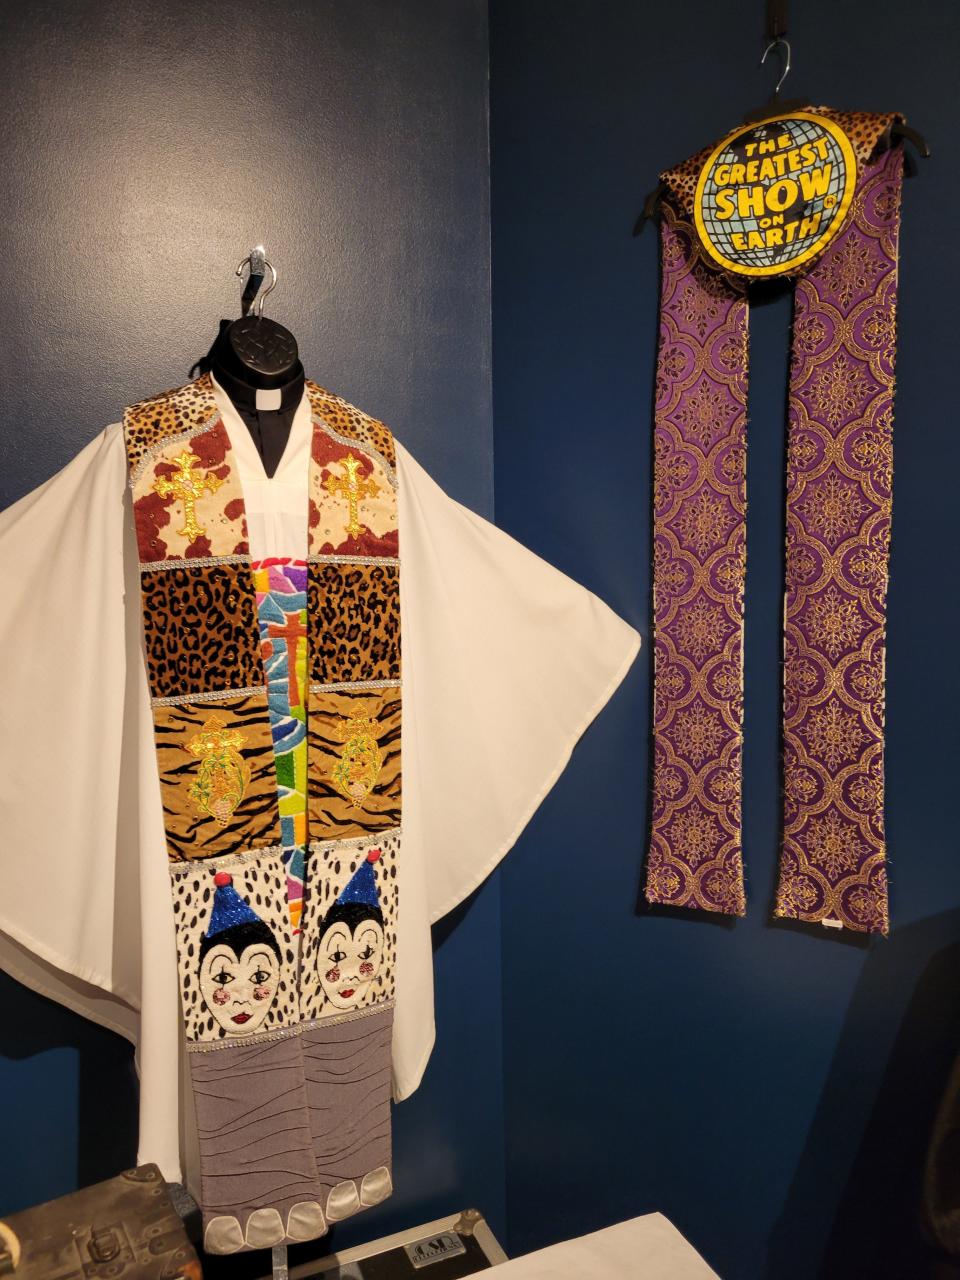 These vestments are part of a special exhibit at Circus World dedicated to circus ministry and the circus chaplains who nurture the spiritual life of circus performers.